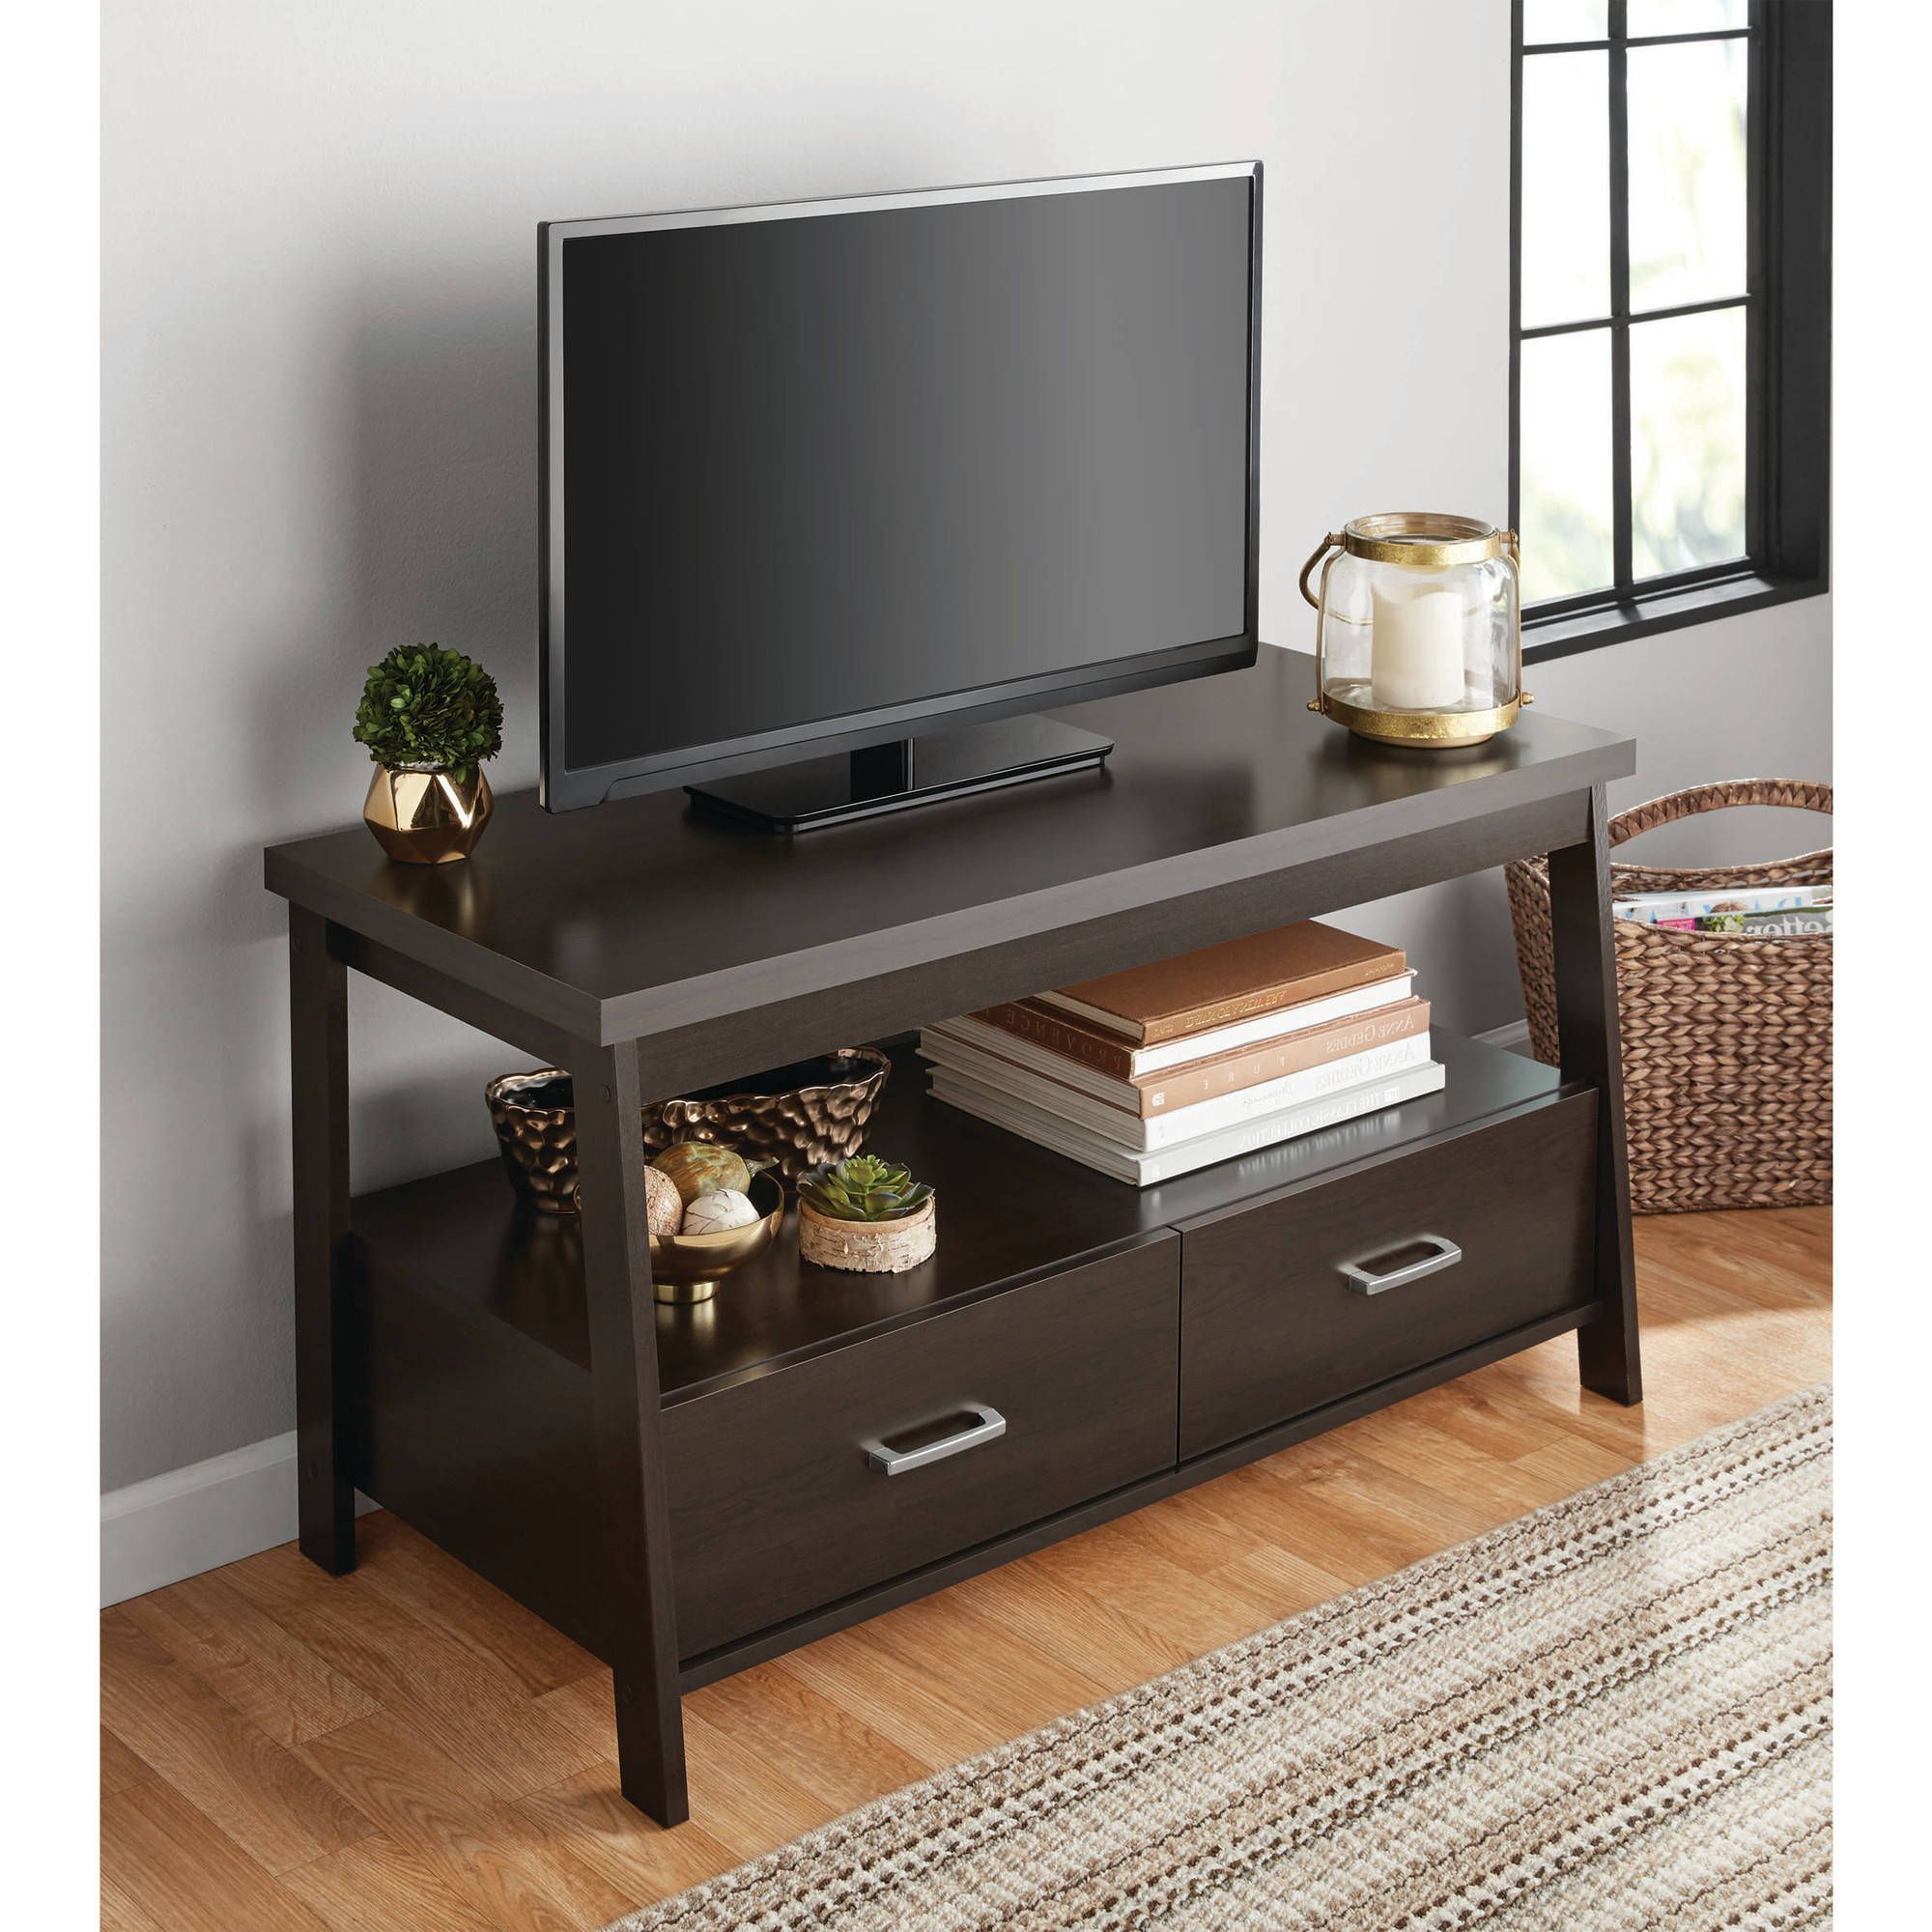 Mainstays Logan Tv Stand For Tvs Up To 47", Espresso Within Alden Design Wooden Tv Stands With Storage Cabinet Espresso (Gallery 3 of 20)